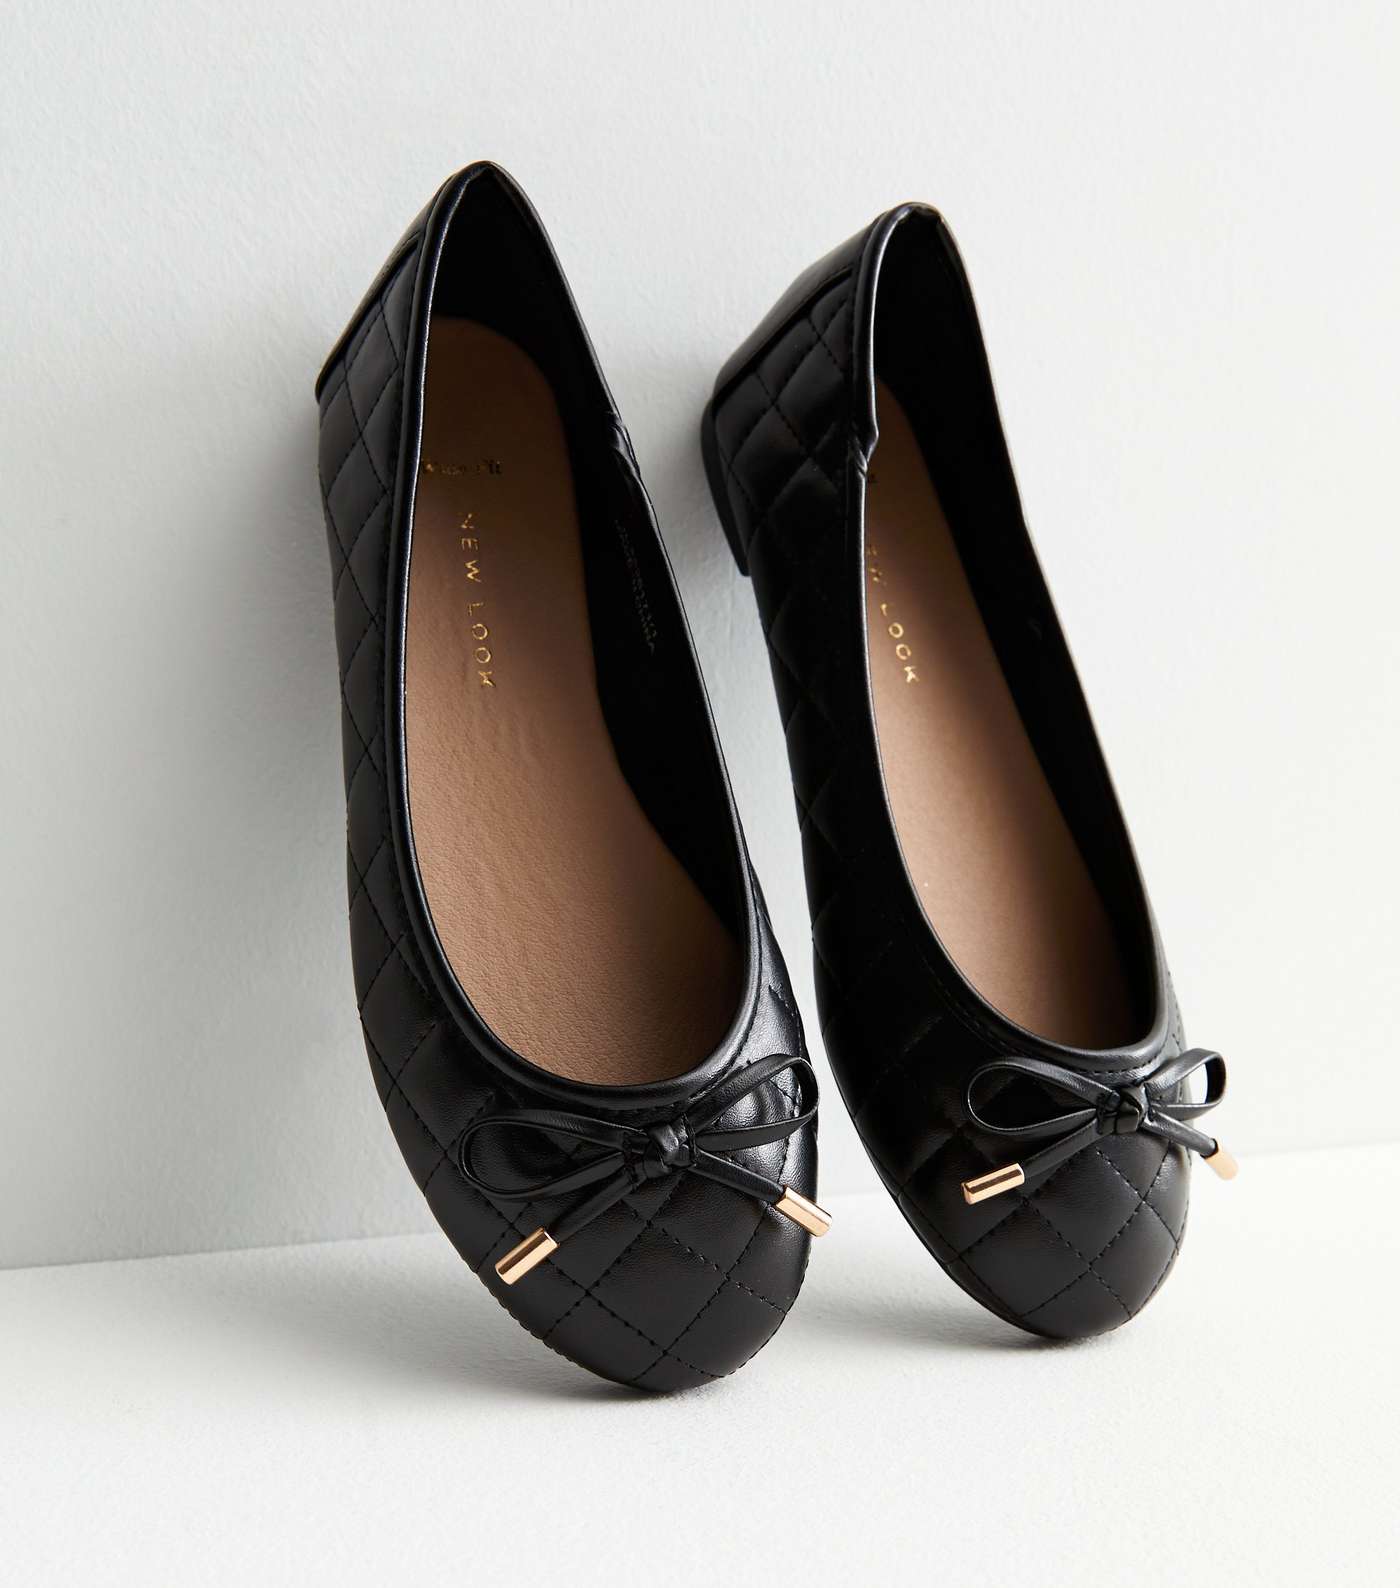 Wide Fit Black Quilted Leather-Look Bow Ballerina Pumps Image 3